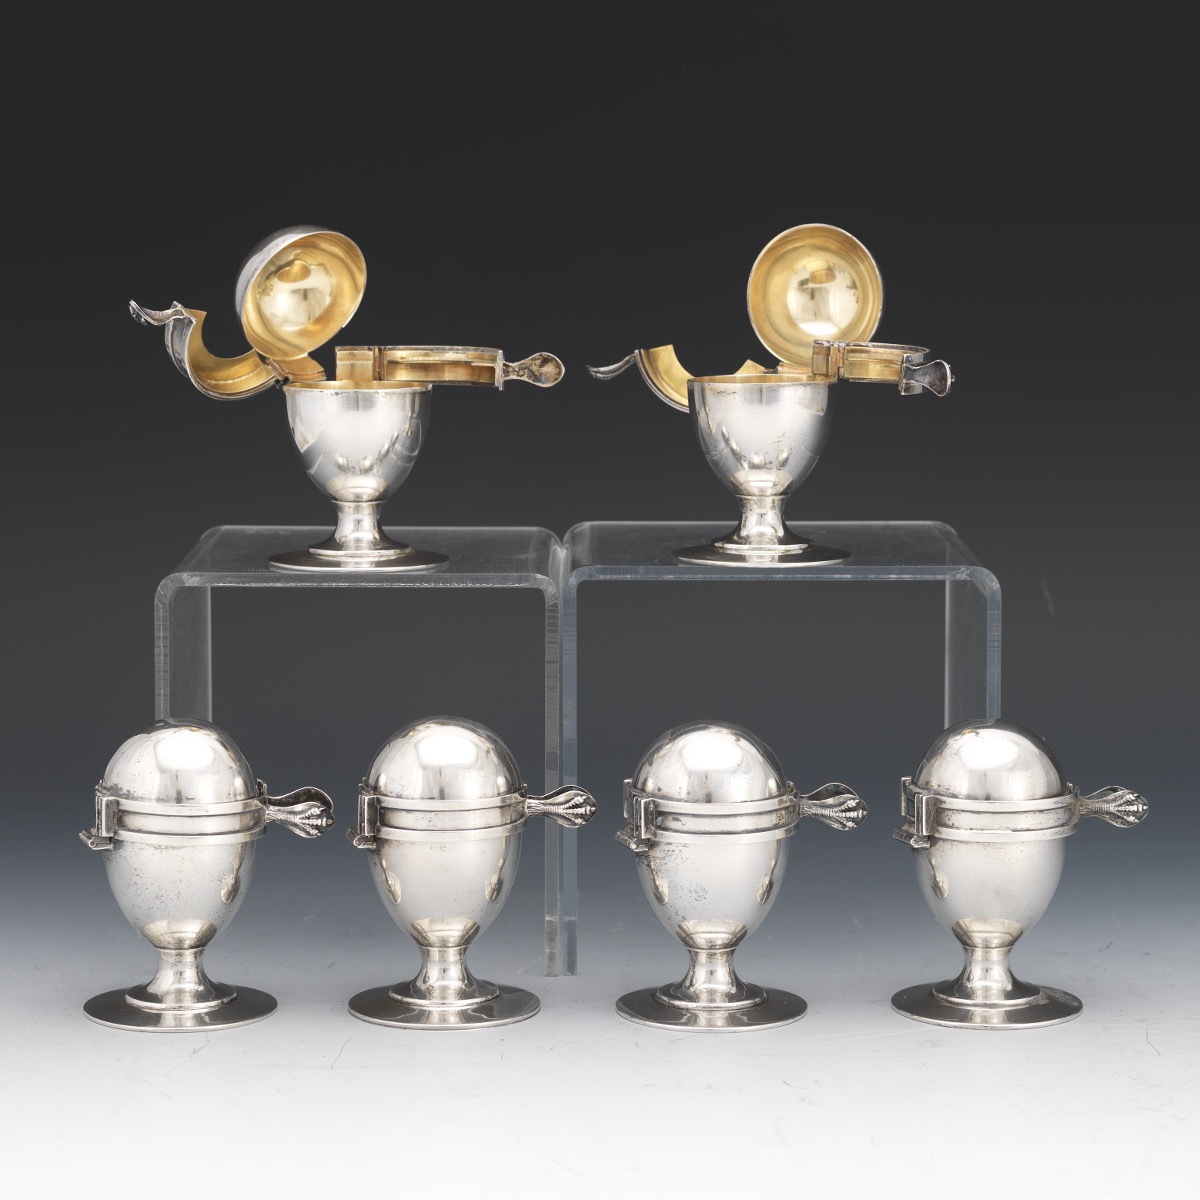 Six Edwardian Sterling Silver with Gold Wash Egg Holders with Topping Brackets - Image 6 of 8